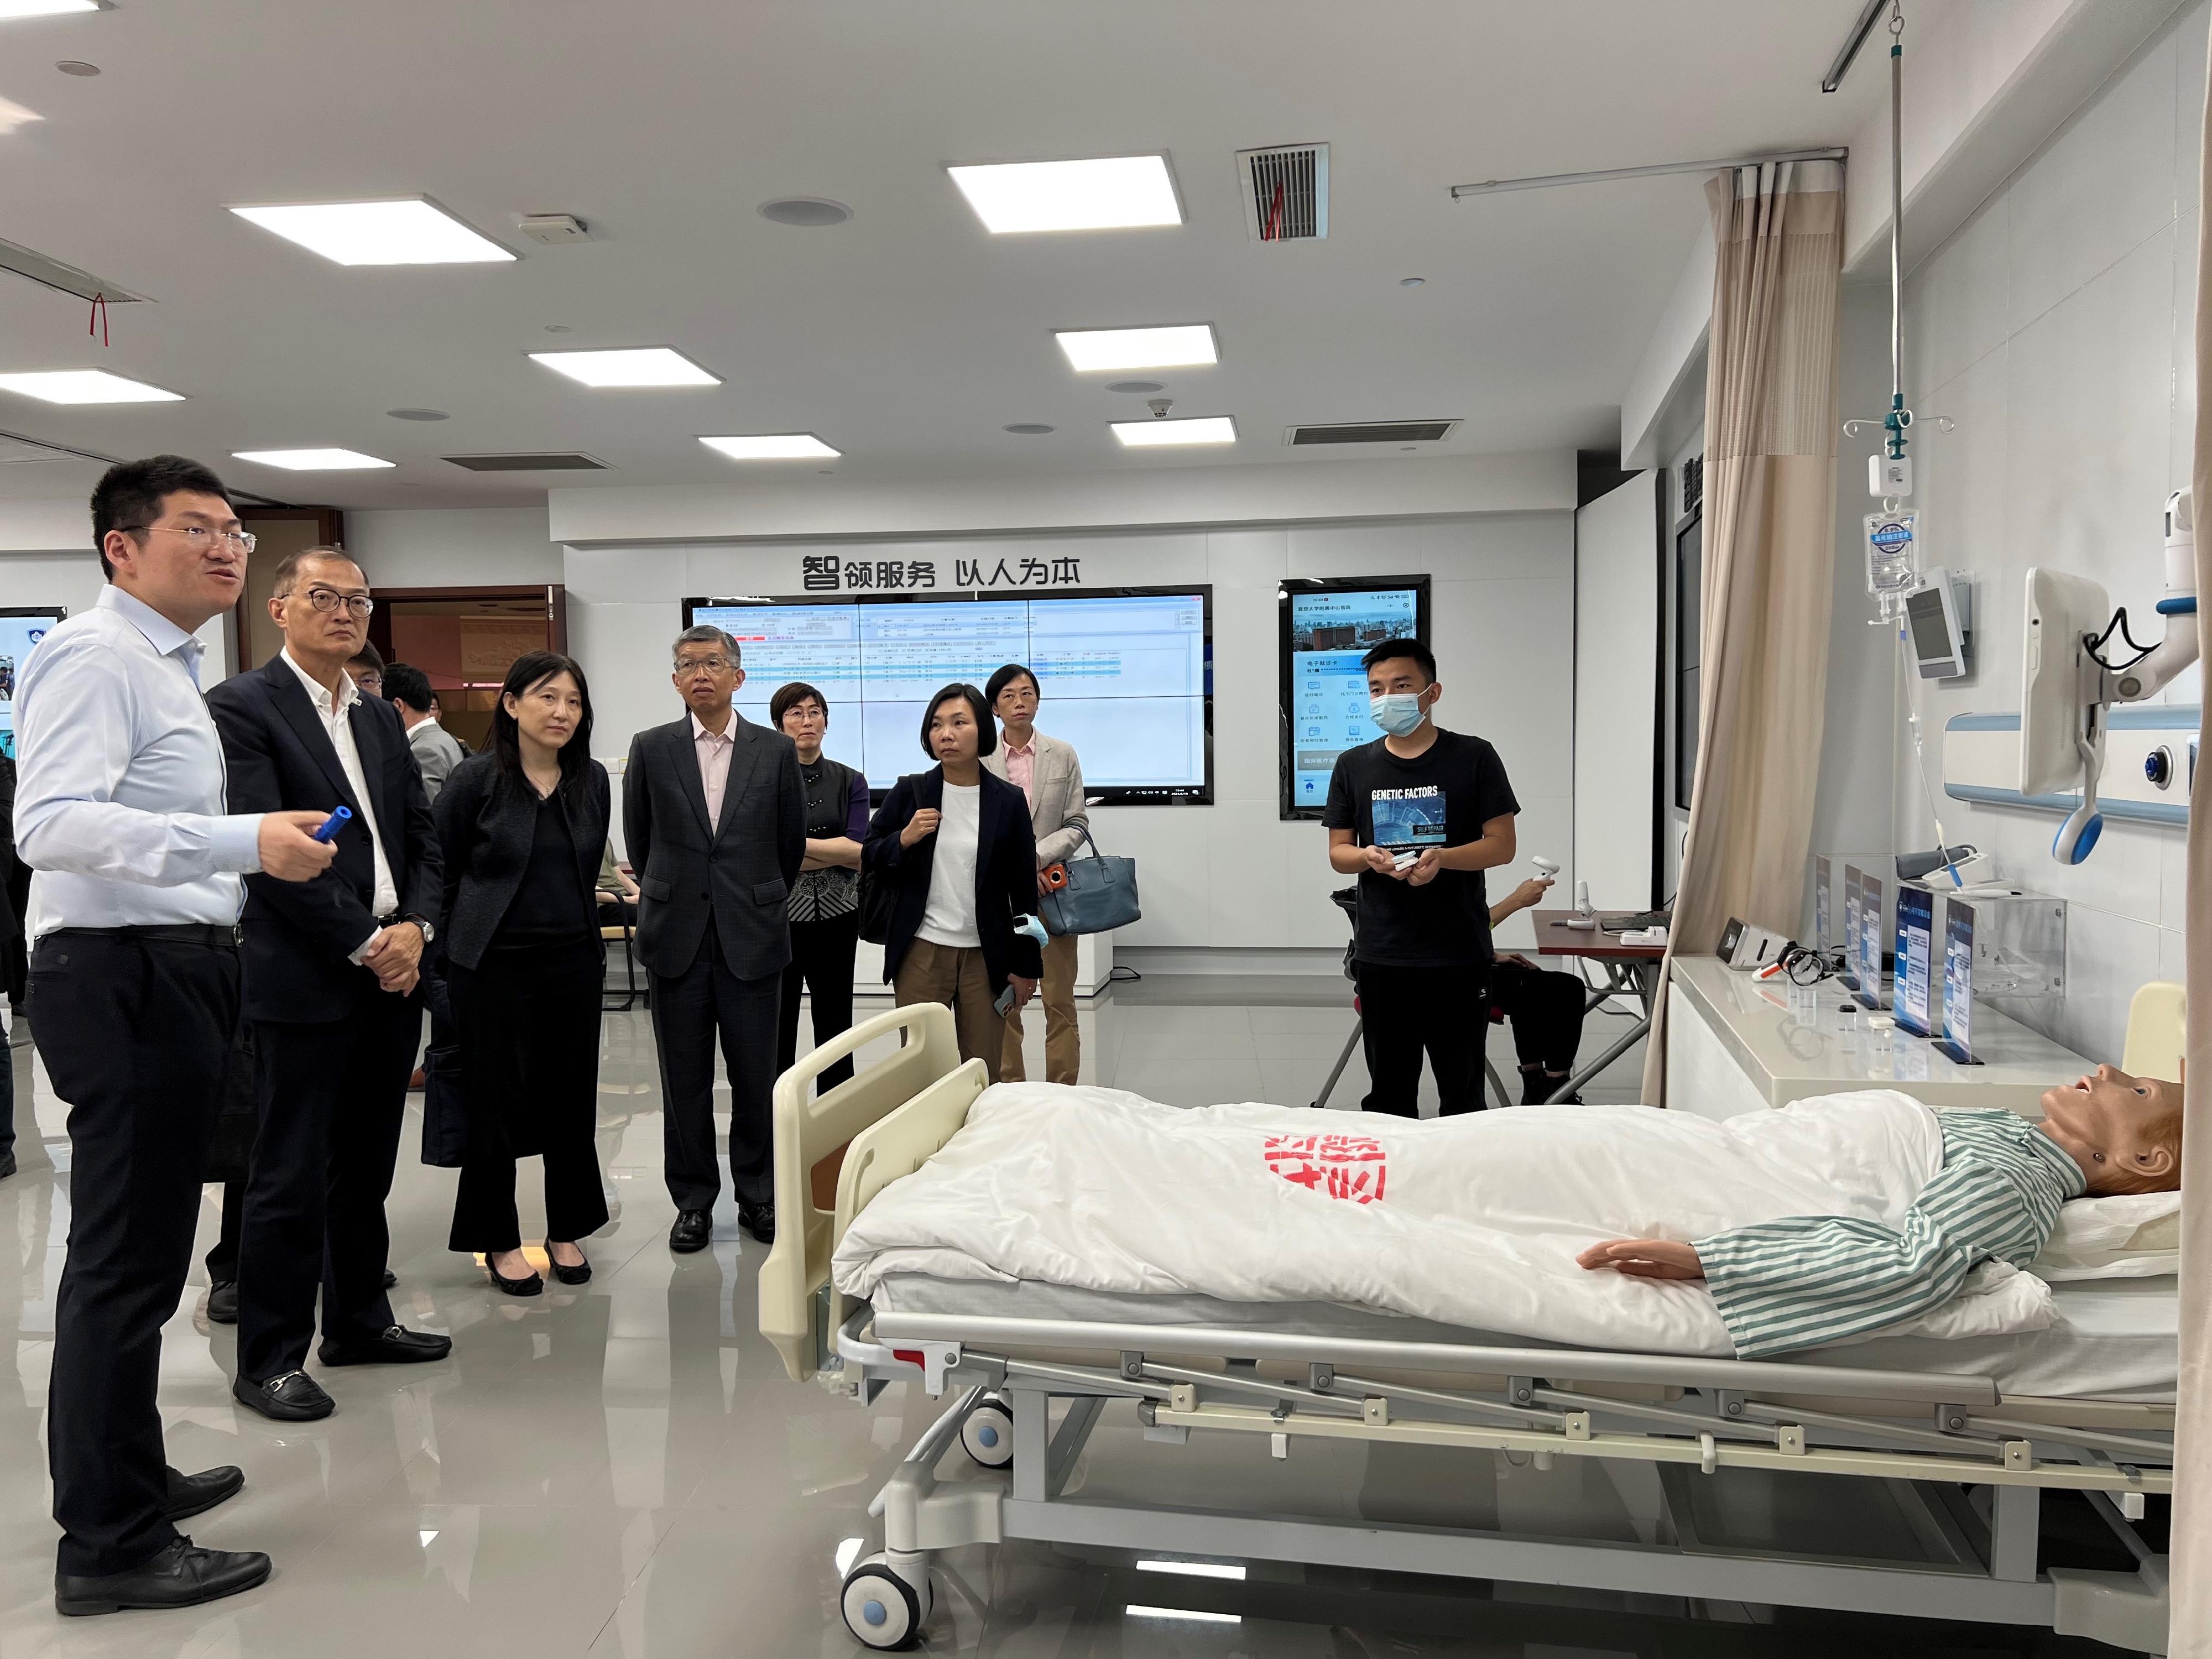 The Secretary for Health, Professor Lo Chung-mau (second left), toured the Exhibition Centre on Smart Healthcare of Zhongshan Hospital affiliated to Fudan University today (June 10) to learn about the hospital's effort in enhancing treatment quality and user experience for patients through the operation as a smart hospital. Looking on is the Director of Cluster Services of the Hospital Authority, Dr Simon Tang (fourth left).